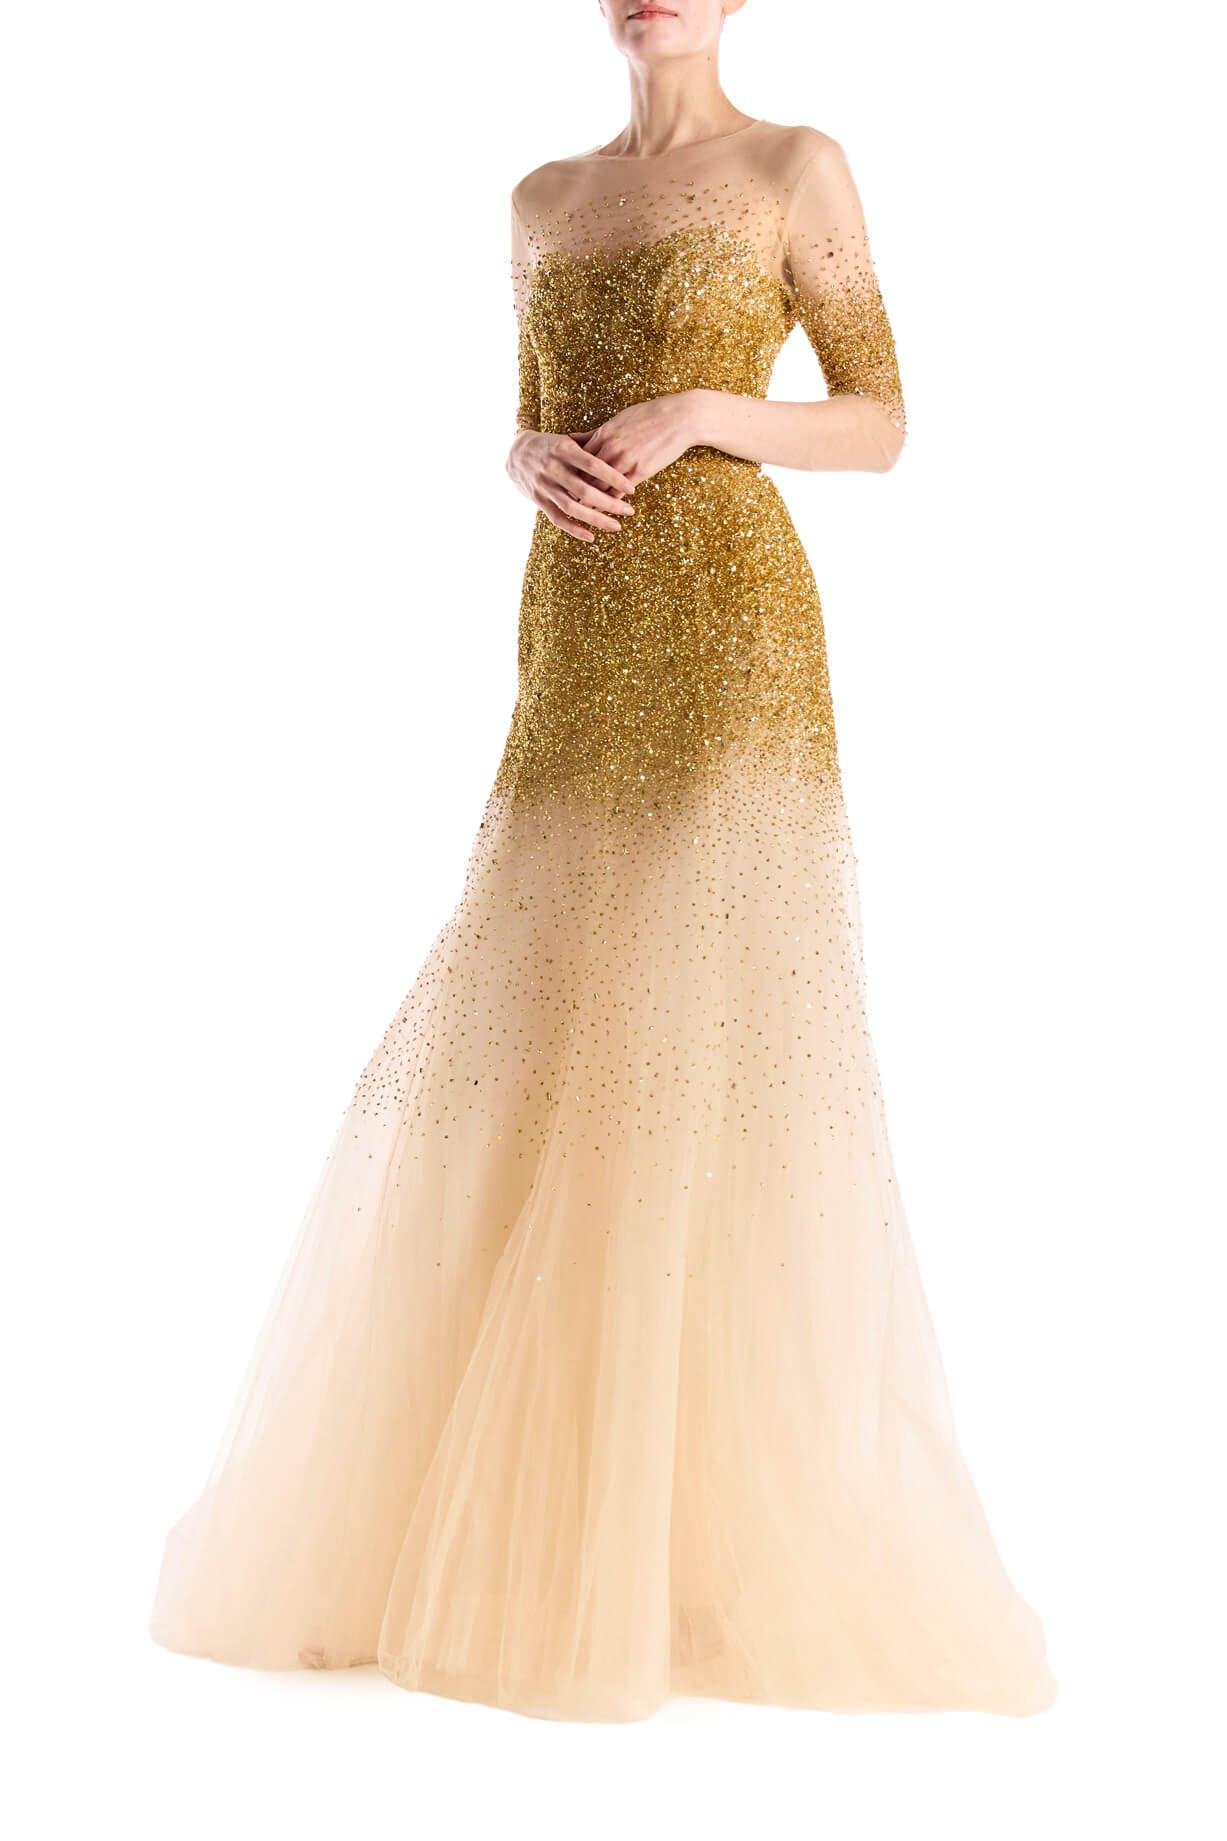 Monique Lhuillier illusion neckline and sheer 3/4 sleeve ballgown with cascading gold embroidery.